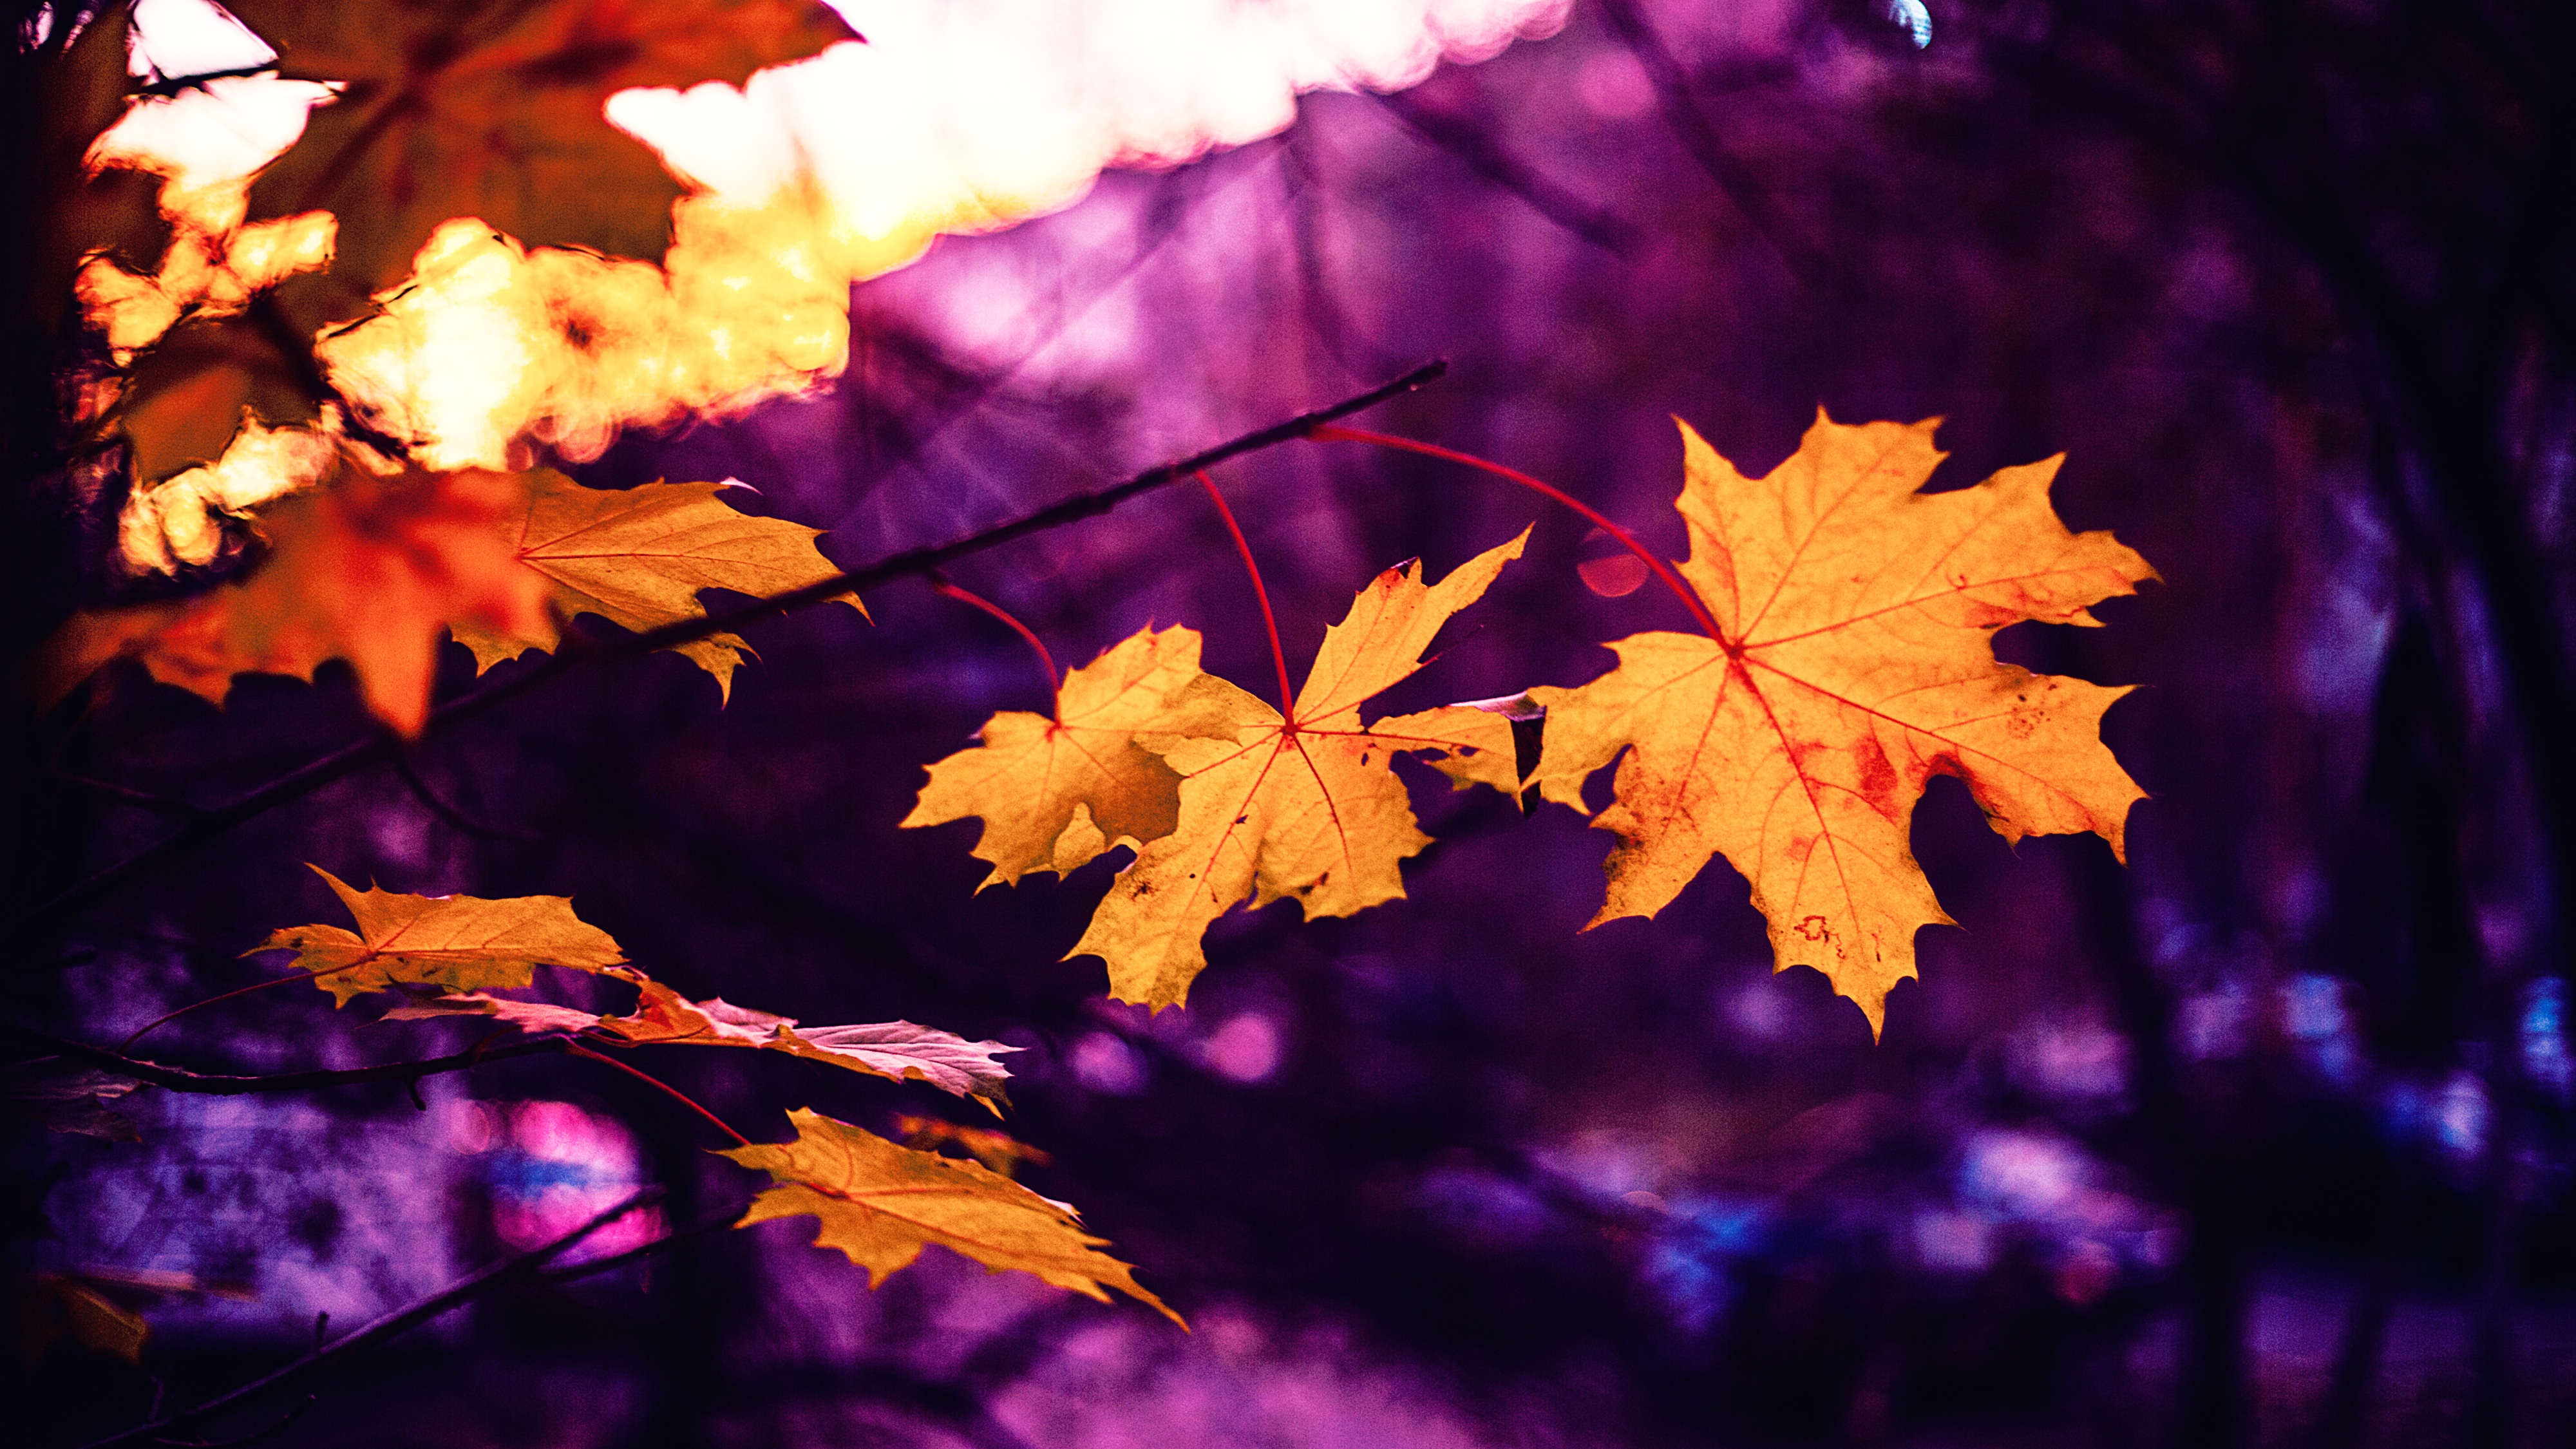 Lock Screen PC Wallpaper autumn, nature, leaves, blur, smooth, maple